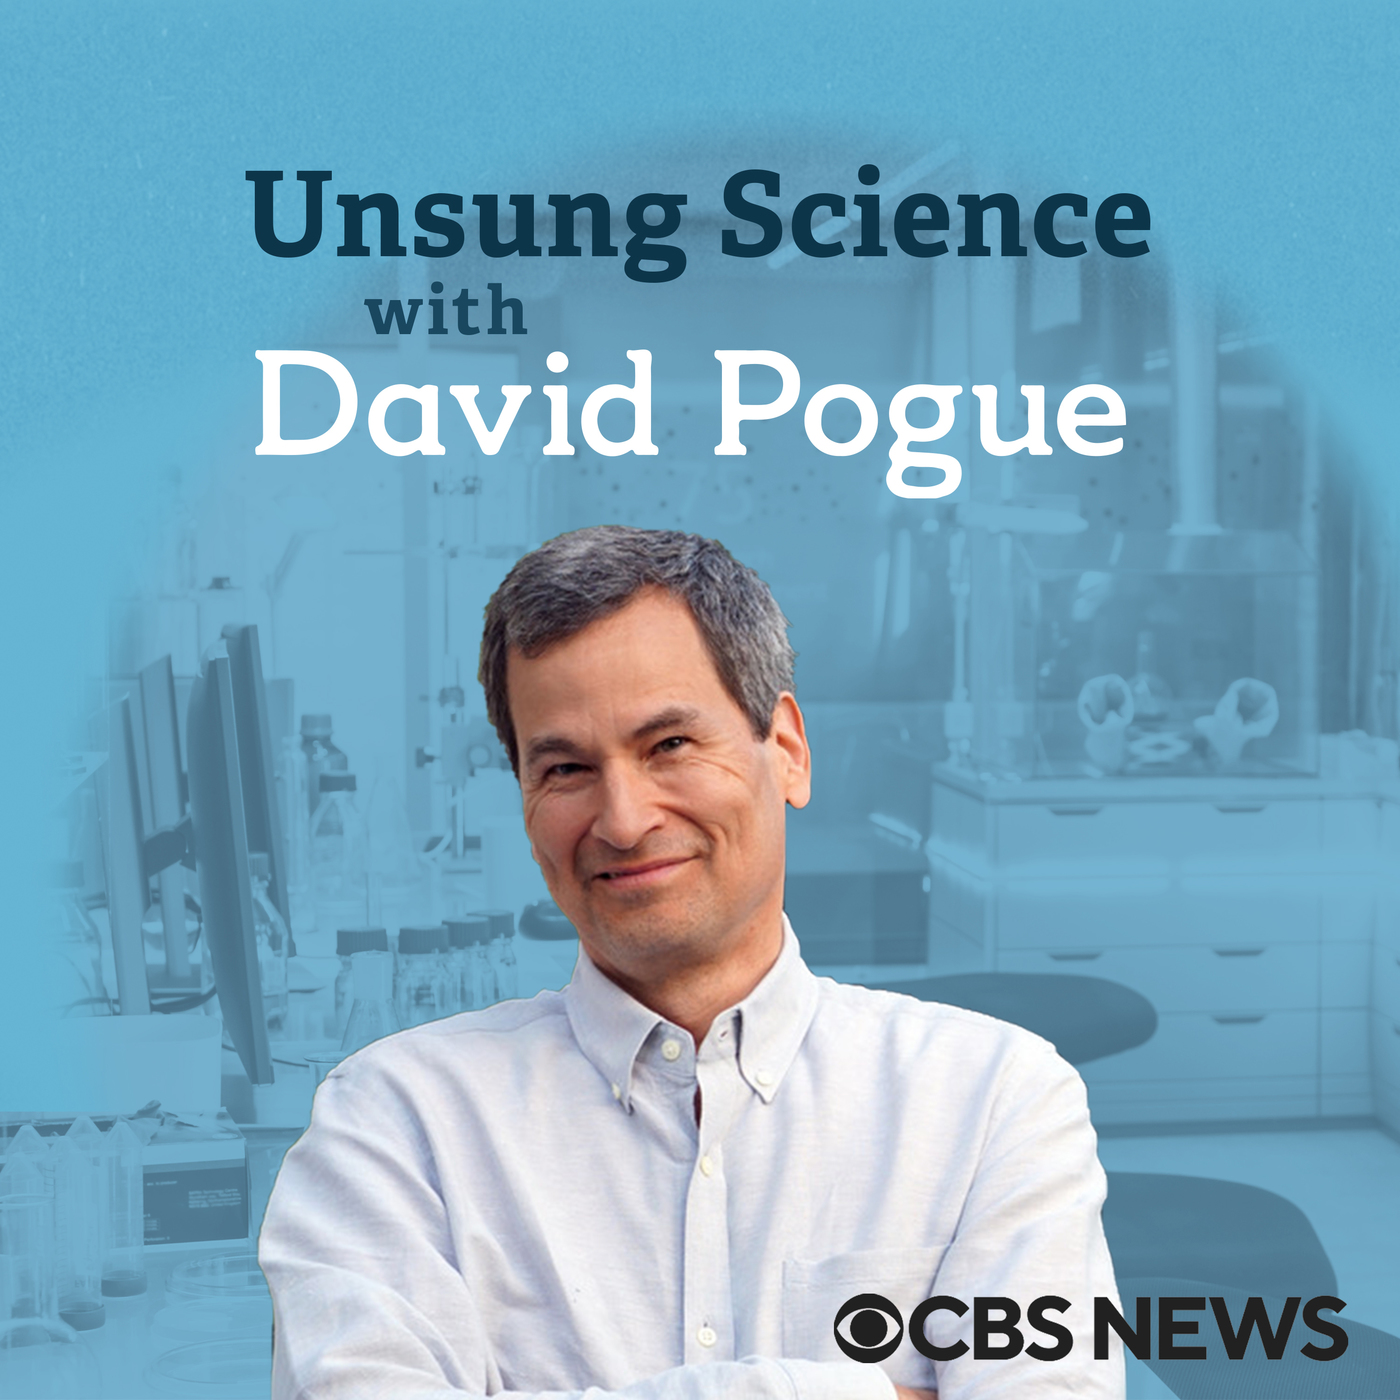 CBS NEWS PODCAST “UNSUNG SCIENCE WITH DAVID POGUE” PREMIERES OCT. 15